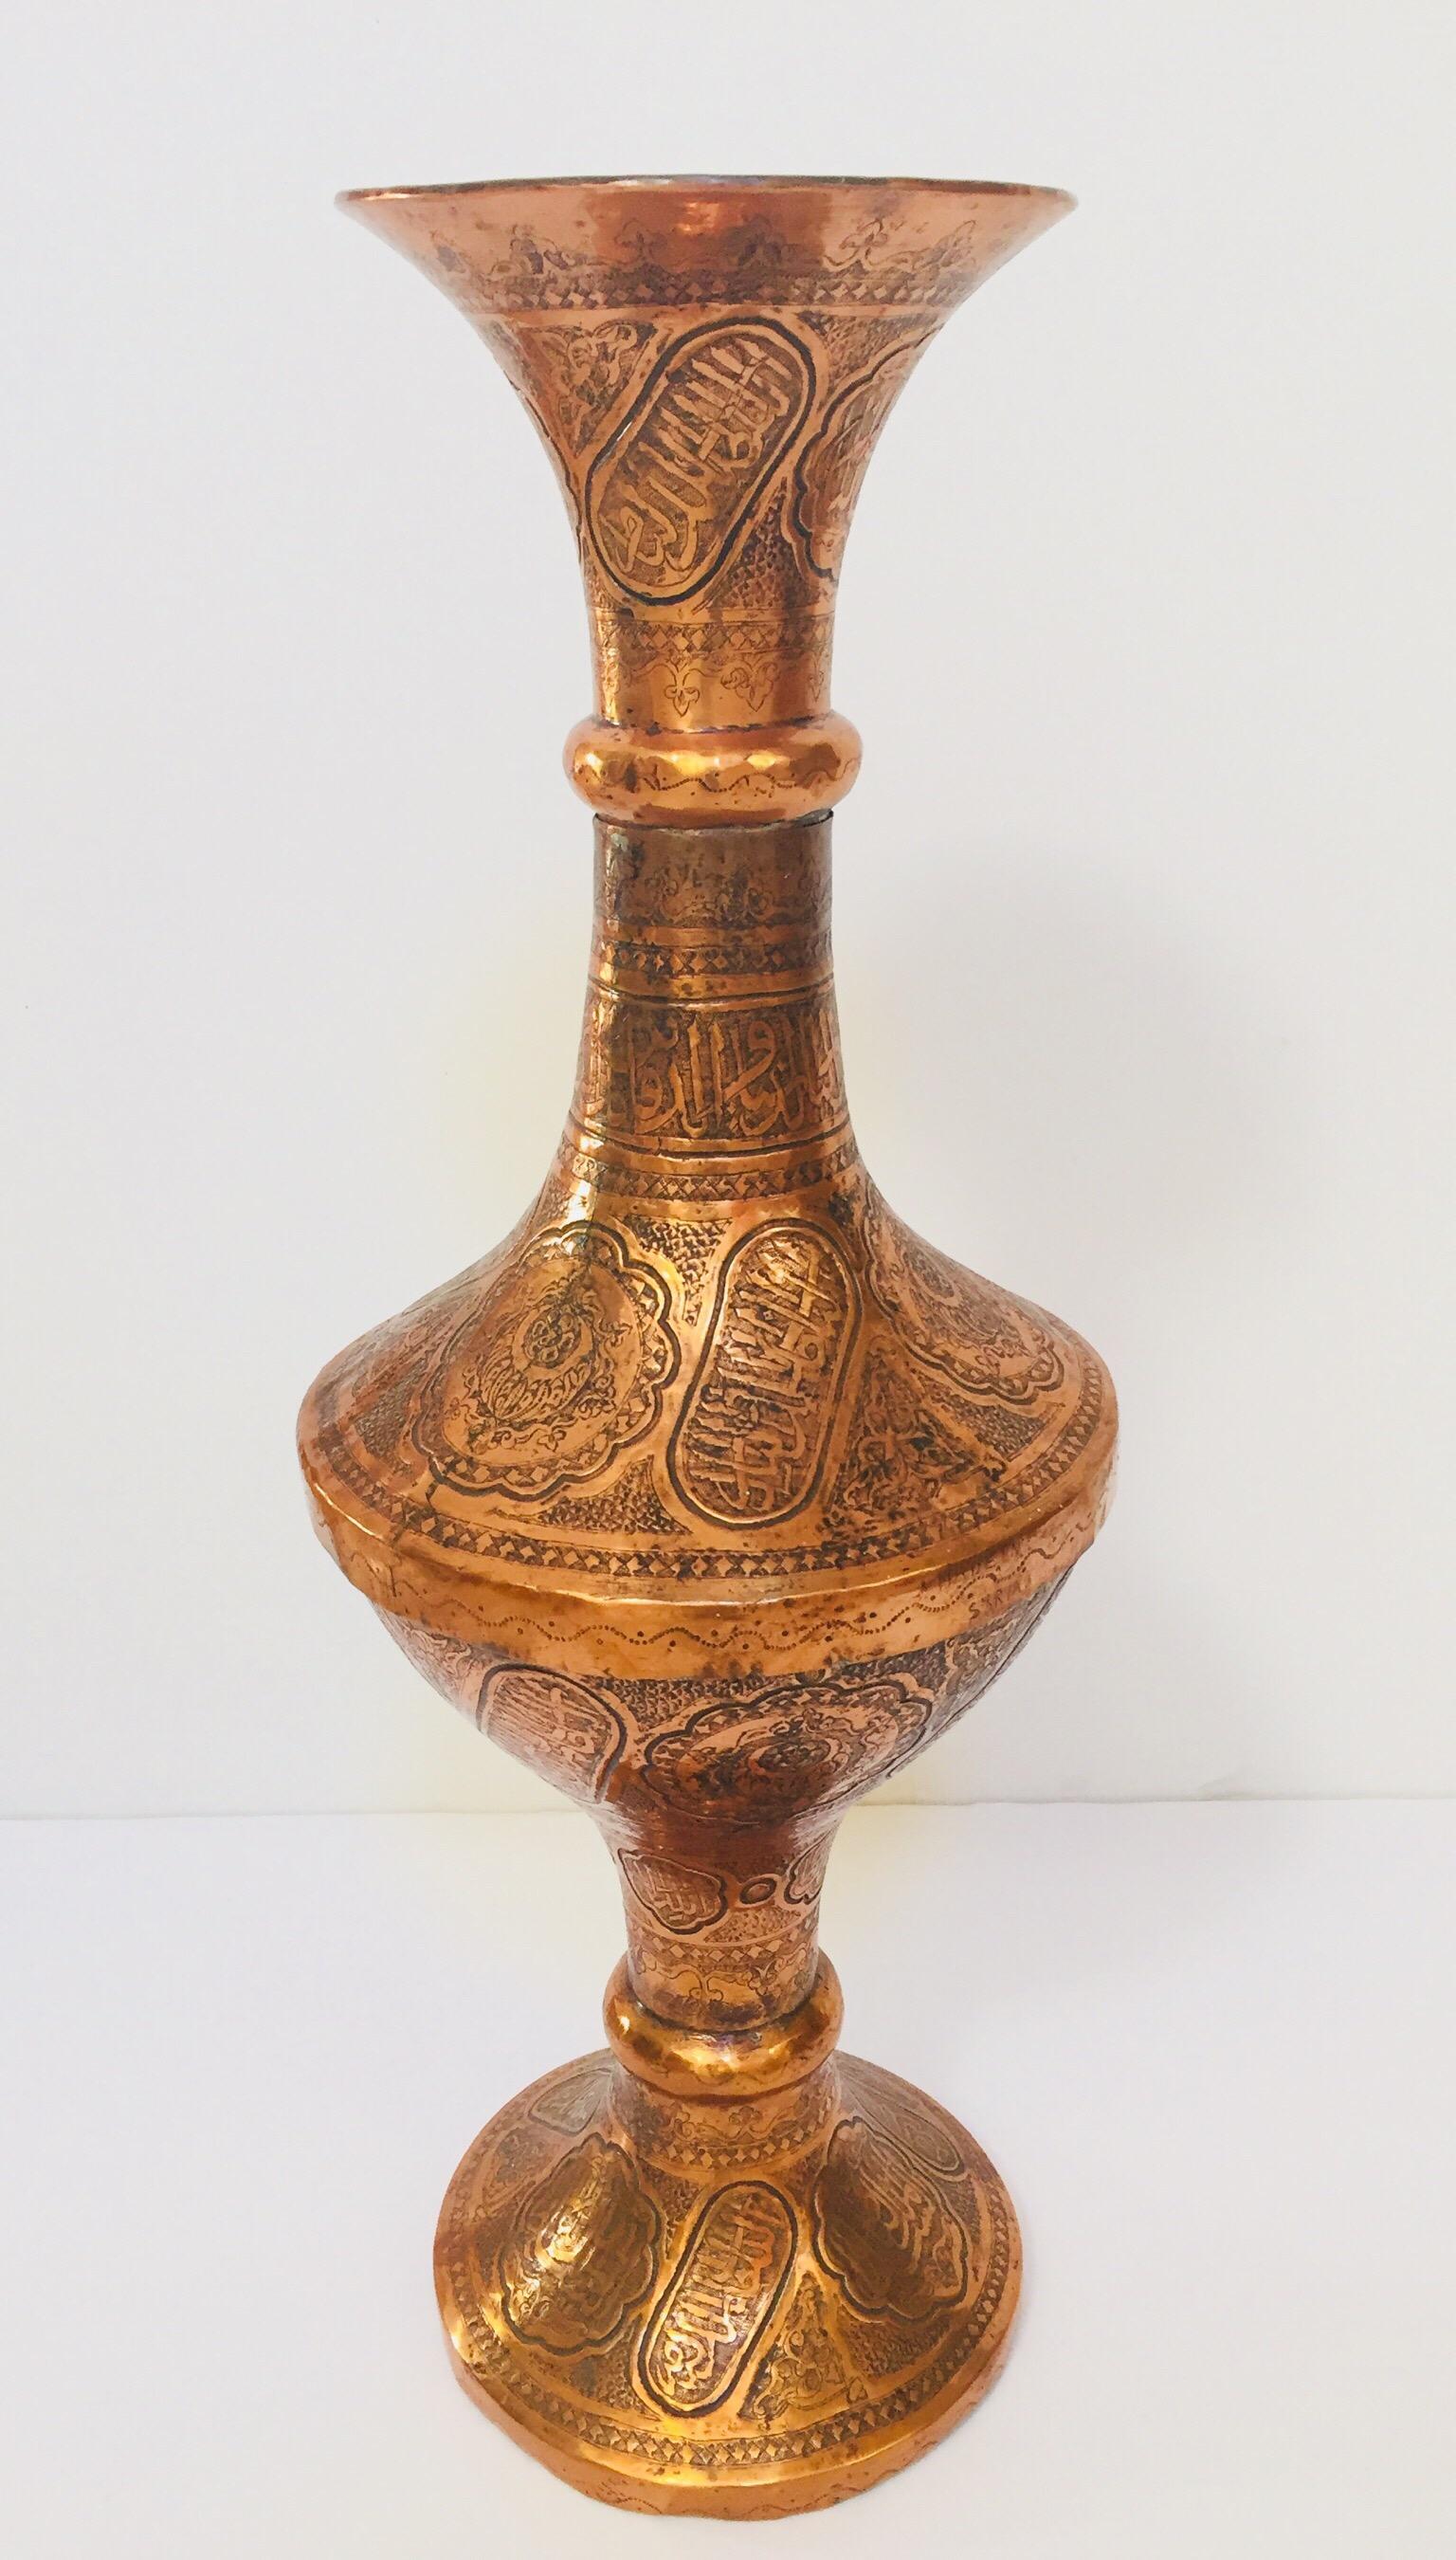 Hammered Middle Eastern Syrian Copper Islamic Art Vase Engraved with Arabic Calligraphy